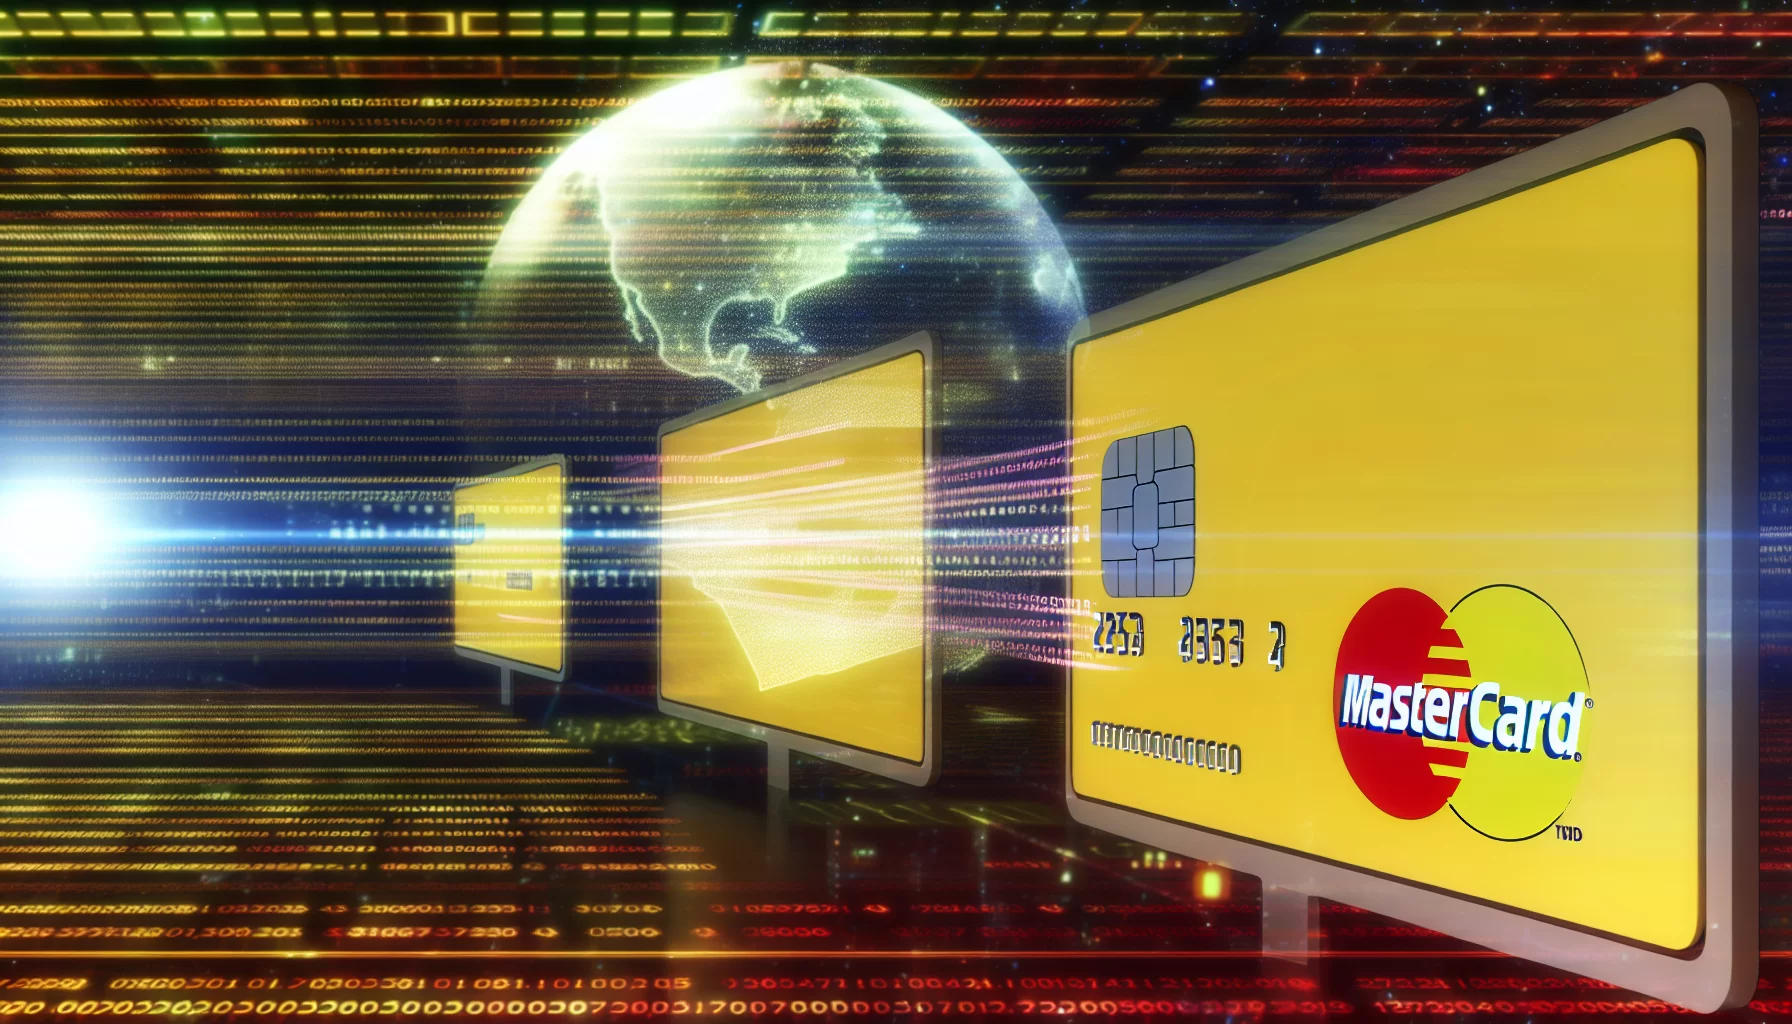 Mastercard plans to revolutionize e-commerce with a 2030 vision for secure, streamlined online payments